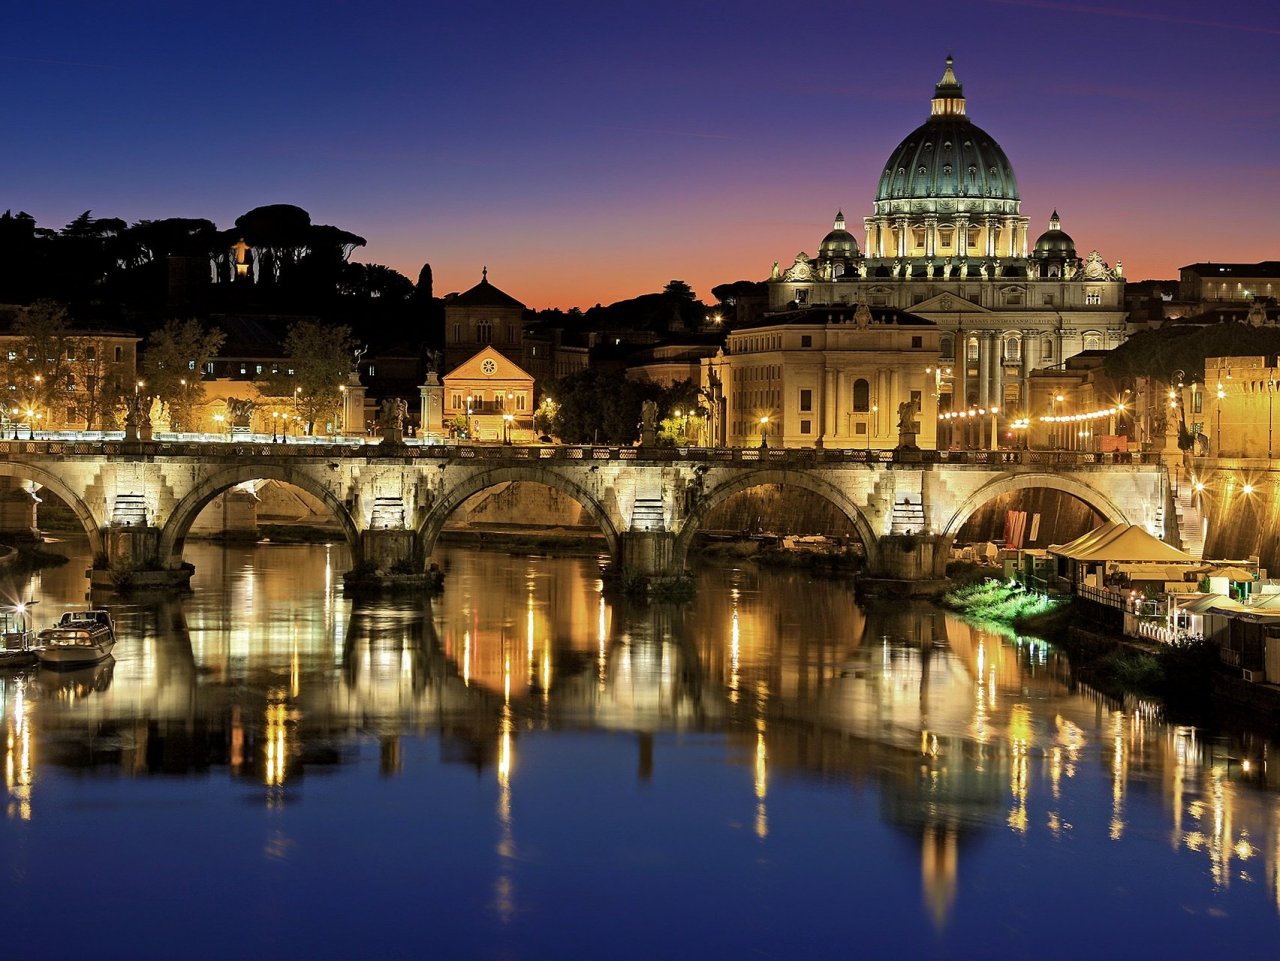 Basilica of St. Peter in the Vatican at Night Online Jigsaw Puzzle